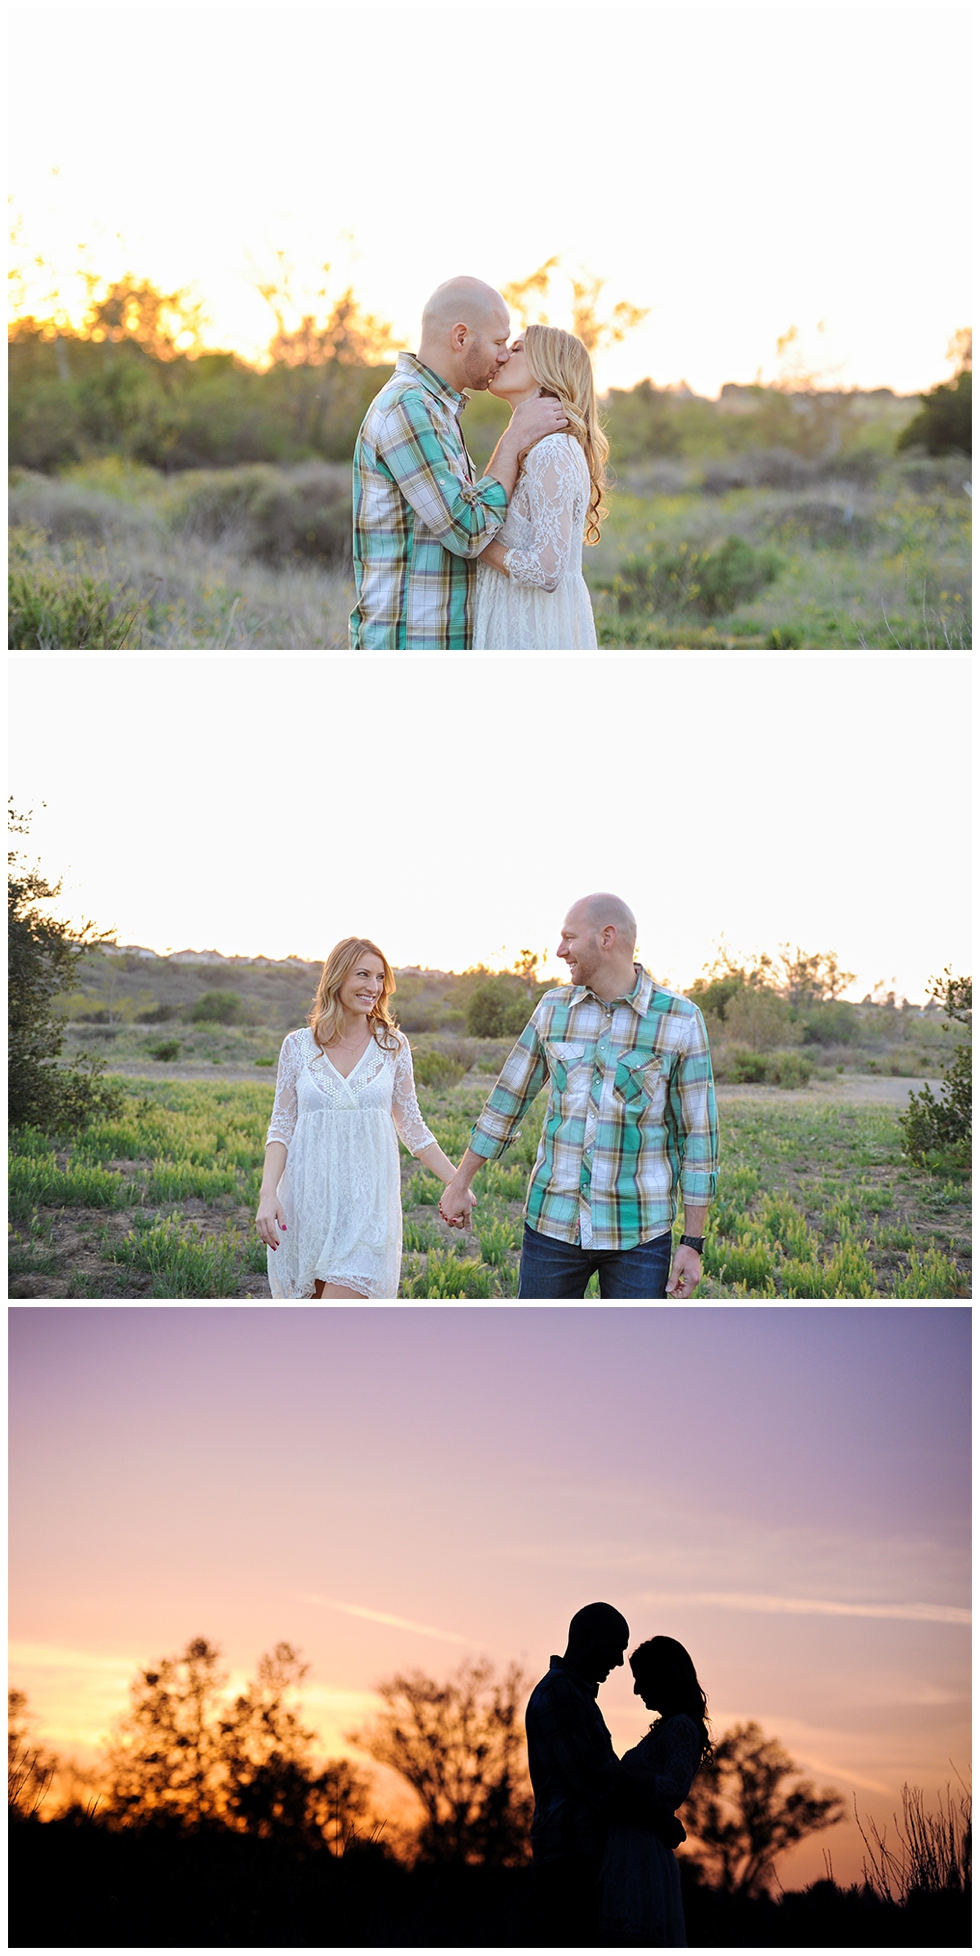 Irvine_Regional_Park_Orange_Circle_Engagement_Photos_Wil_Dee_and_Jessica_Waters-15